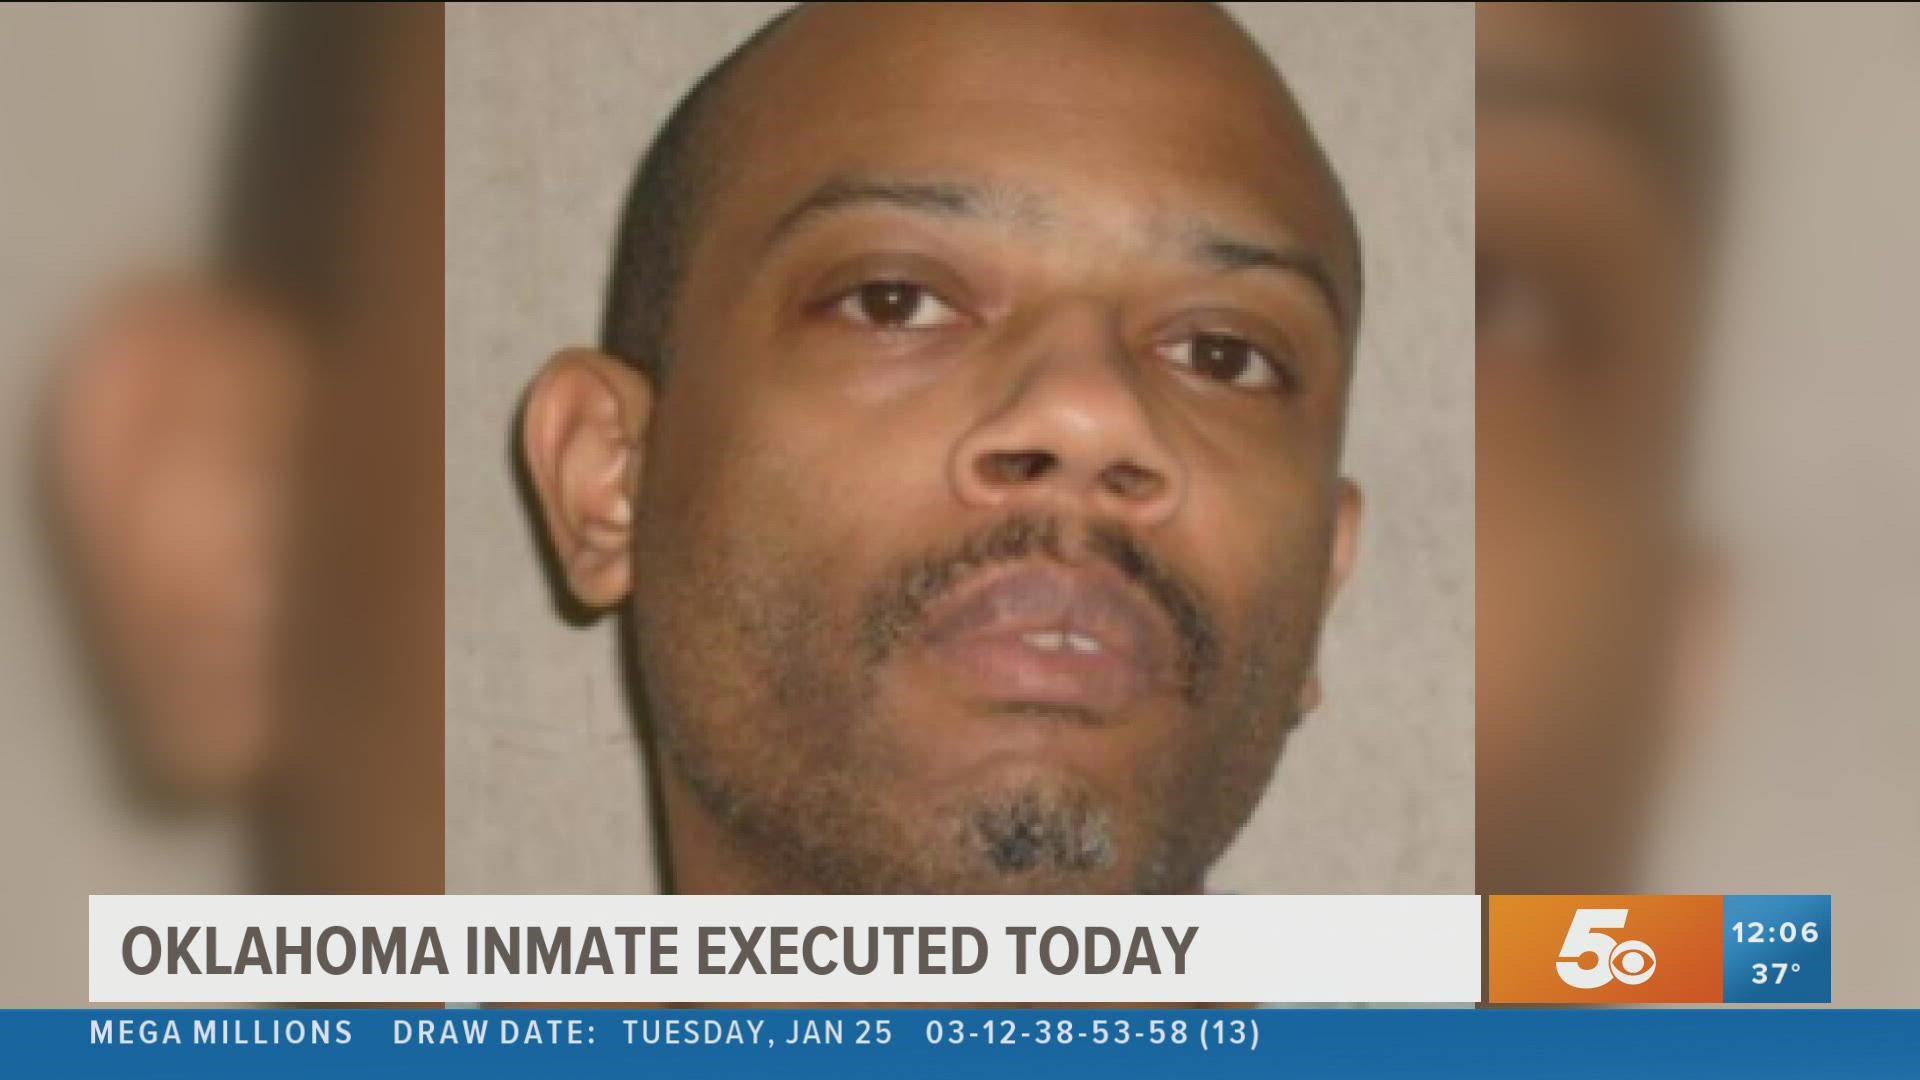 46-year-old Donald Grant received a lethal injection Thursday morning for the brutal deaths of two hotel workers during a robbery in 2001.